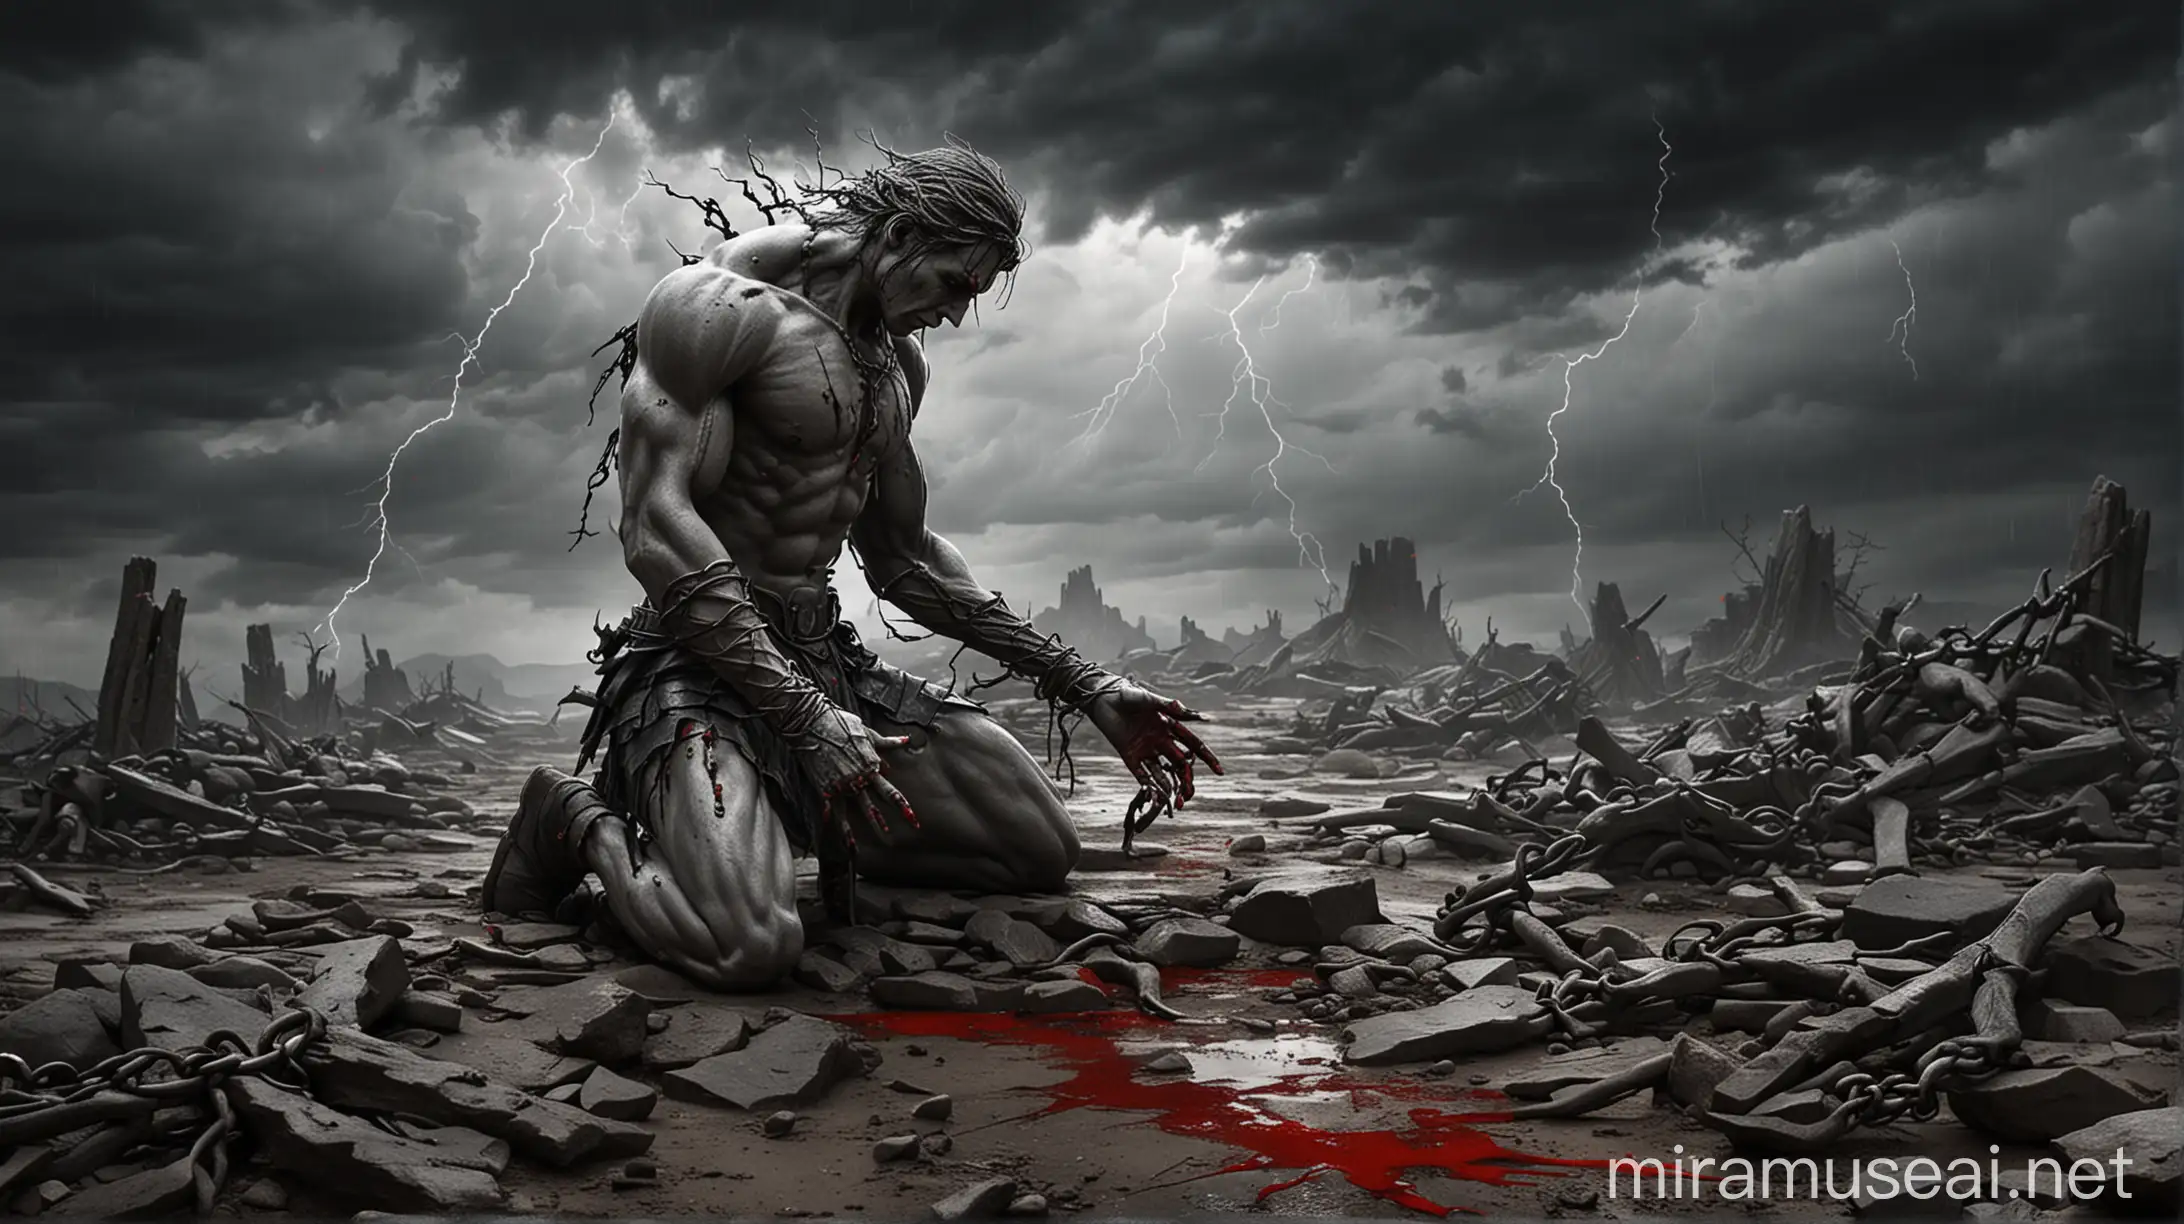 Grieving Warrior in Storm Confronting Inner Demons Amidst Haunting Memories